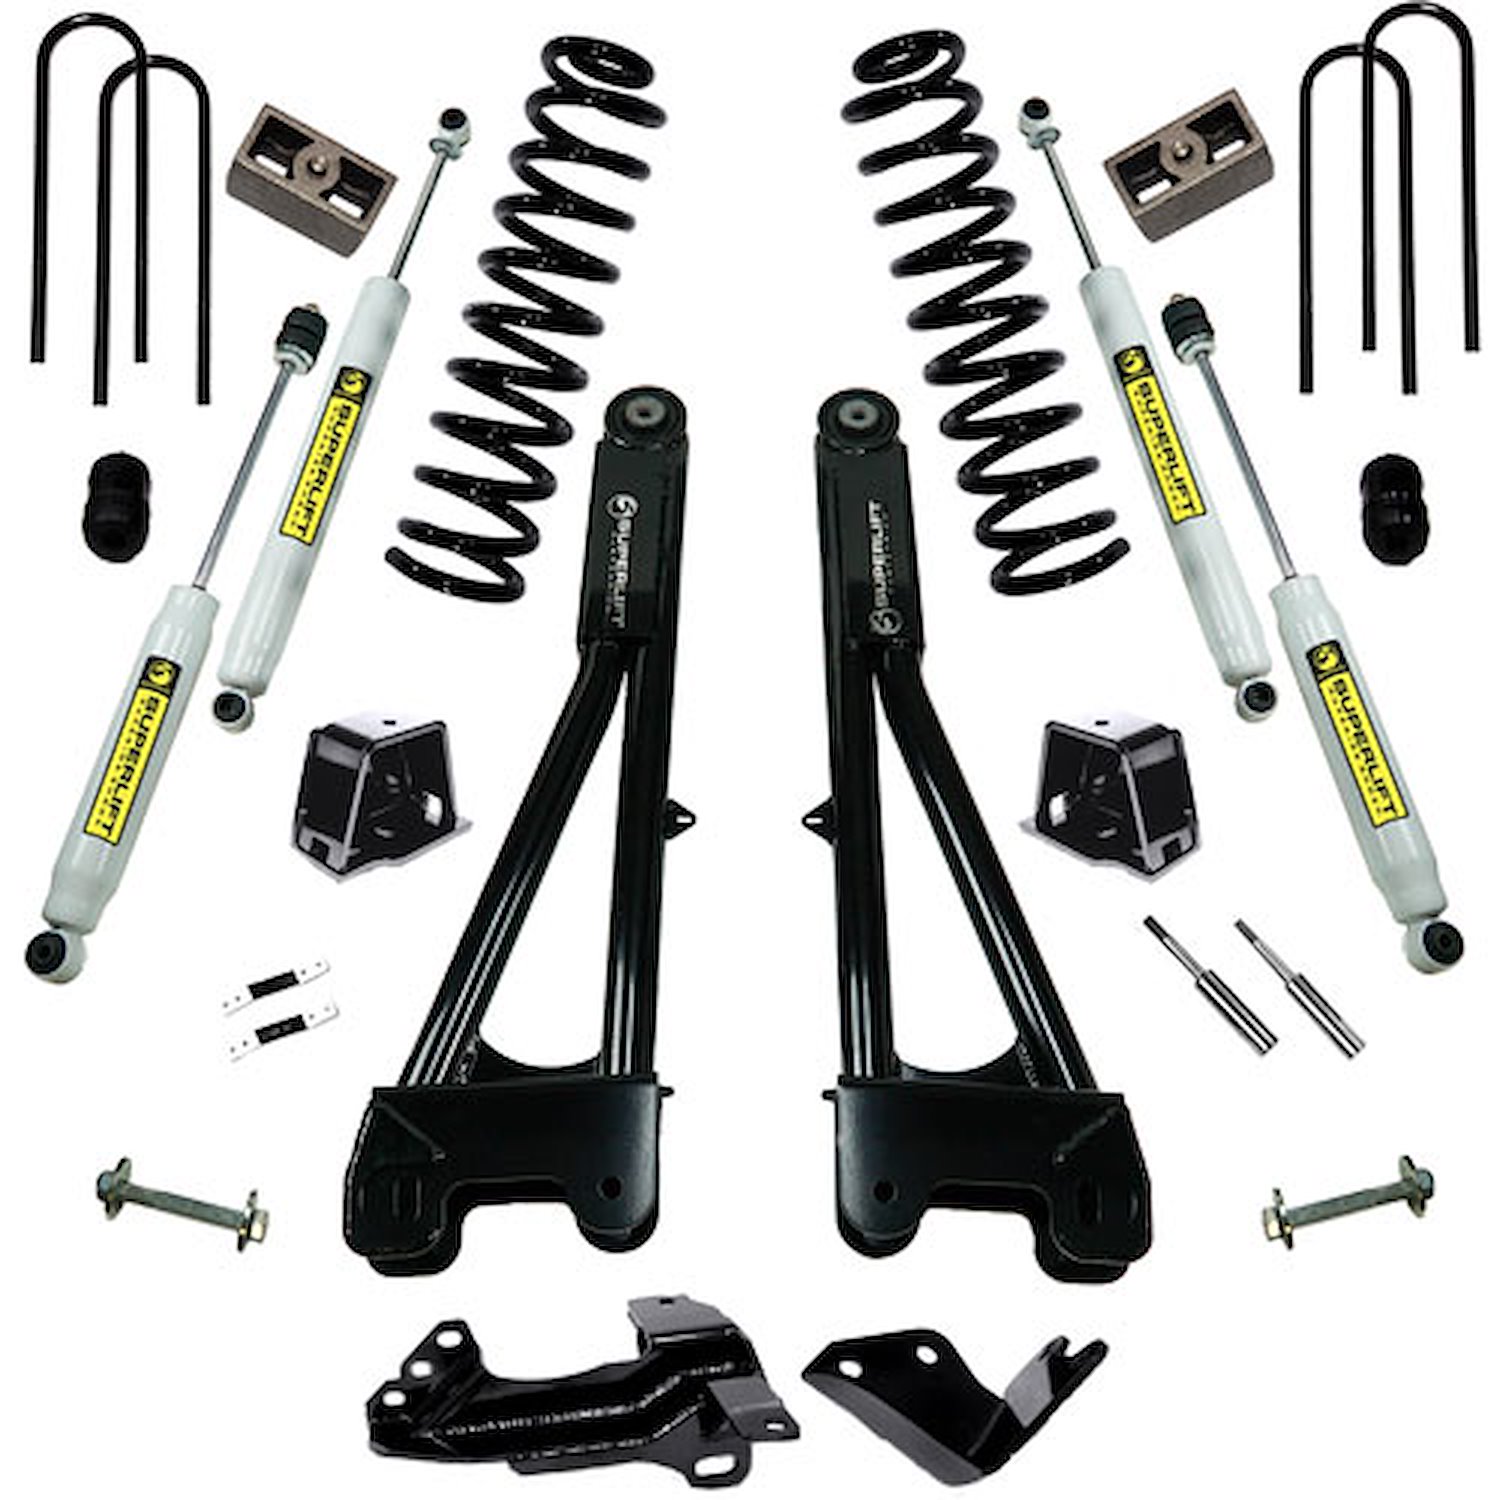 Suspension Lift Kit 2005-07 Ford F250 and F350 4WD models